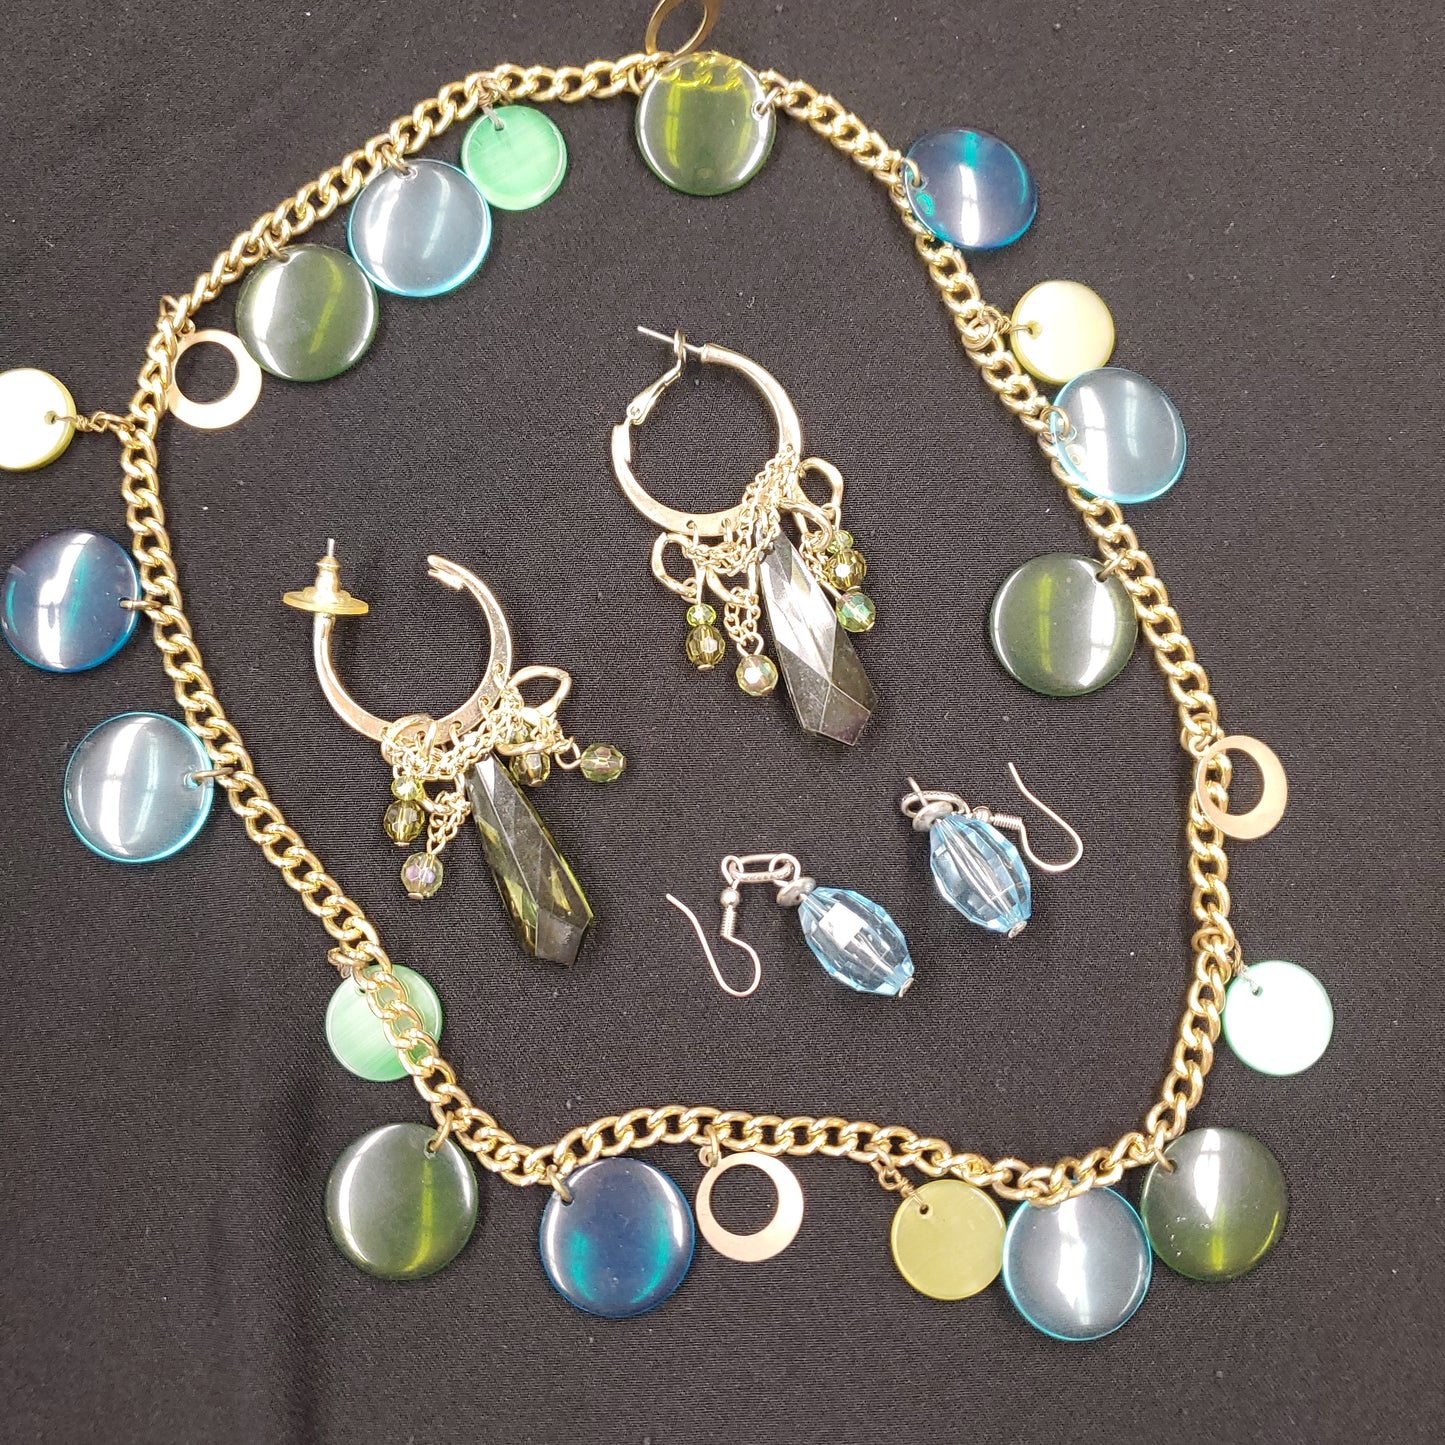 Jewelry in Sets of 3